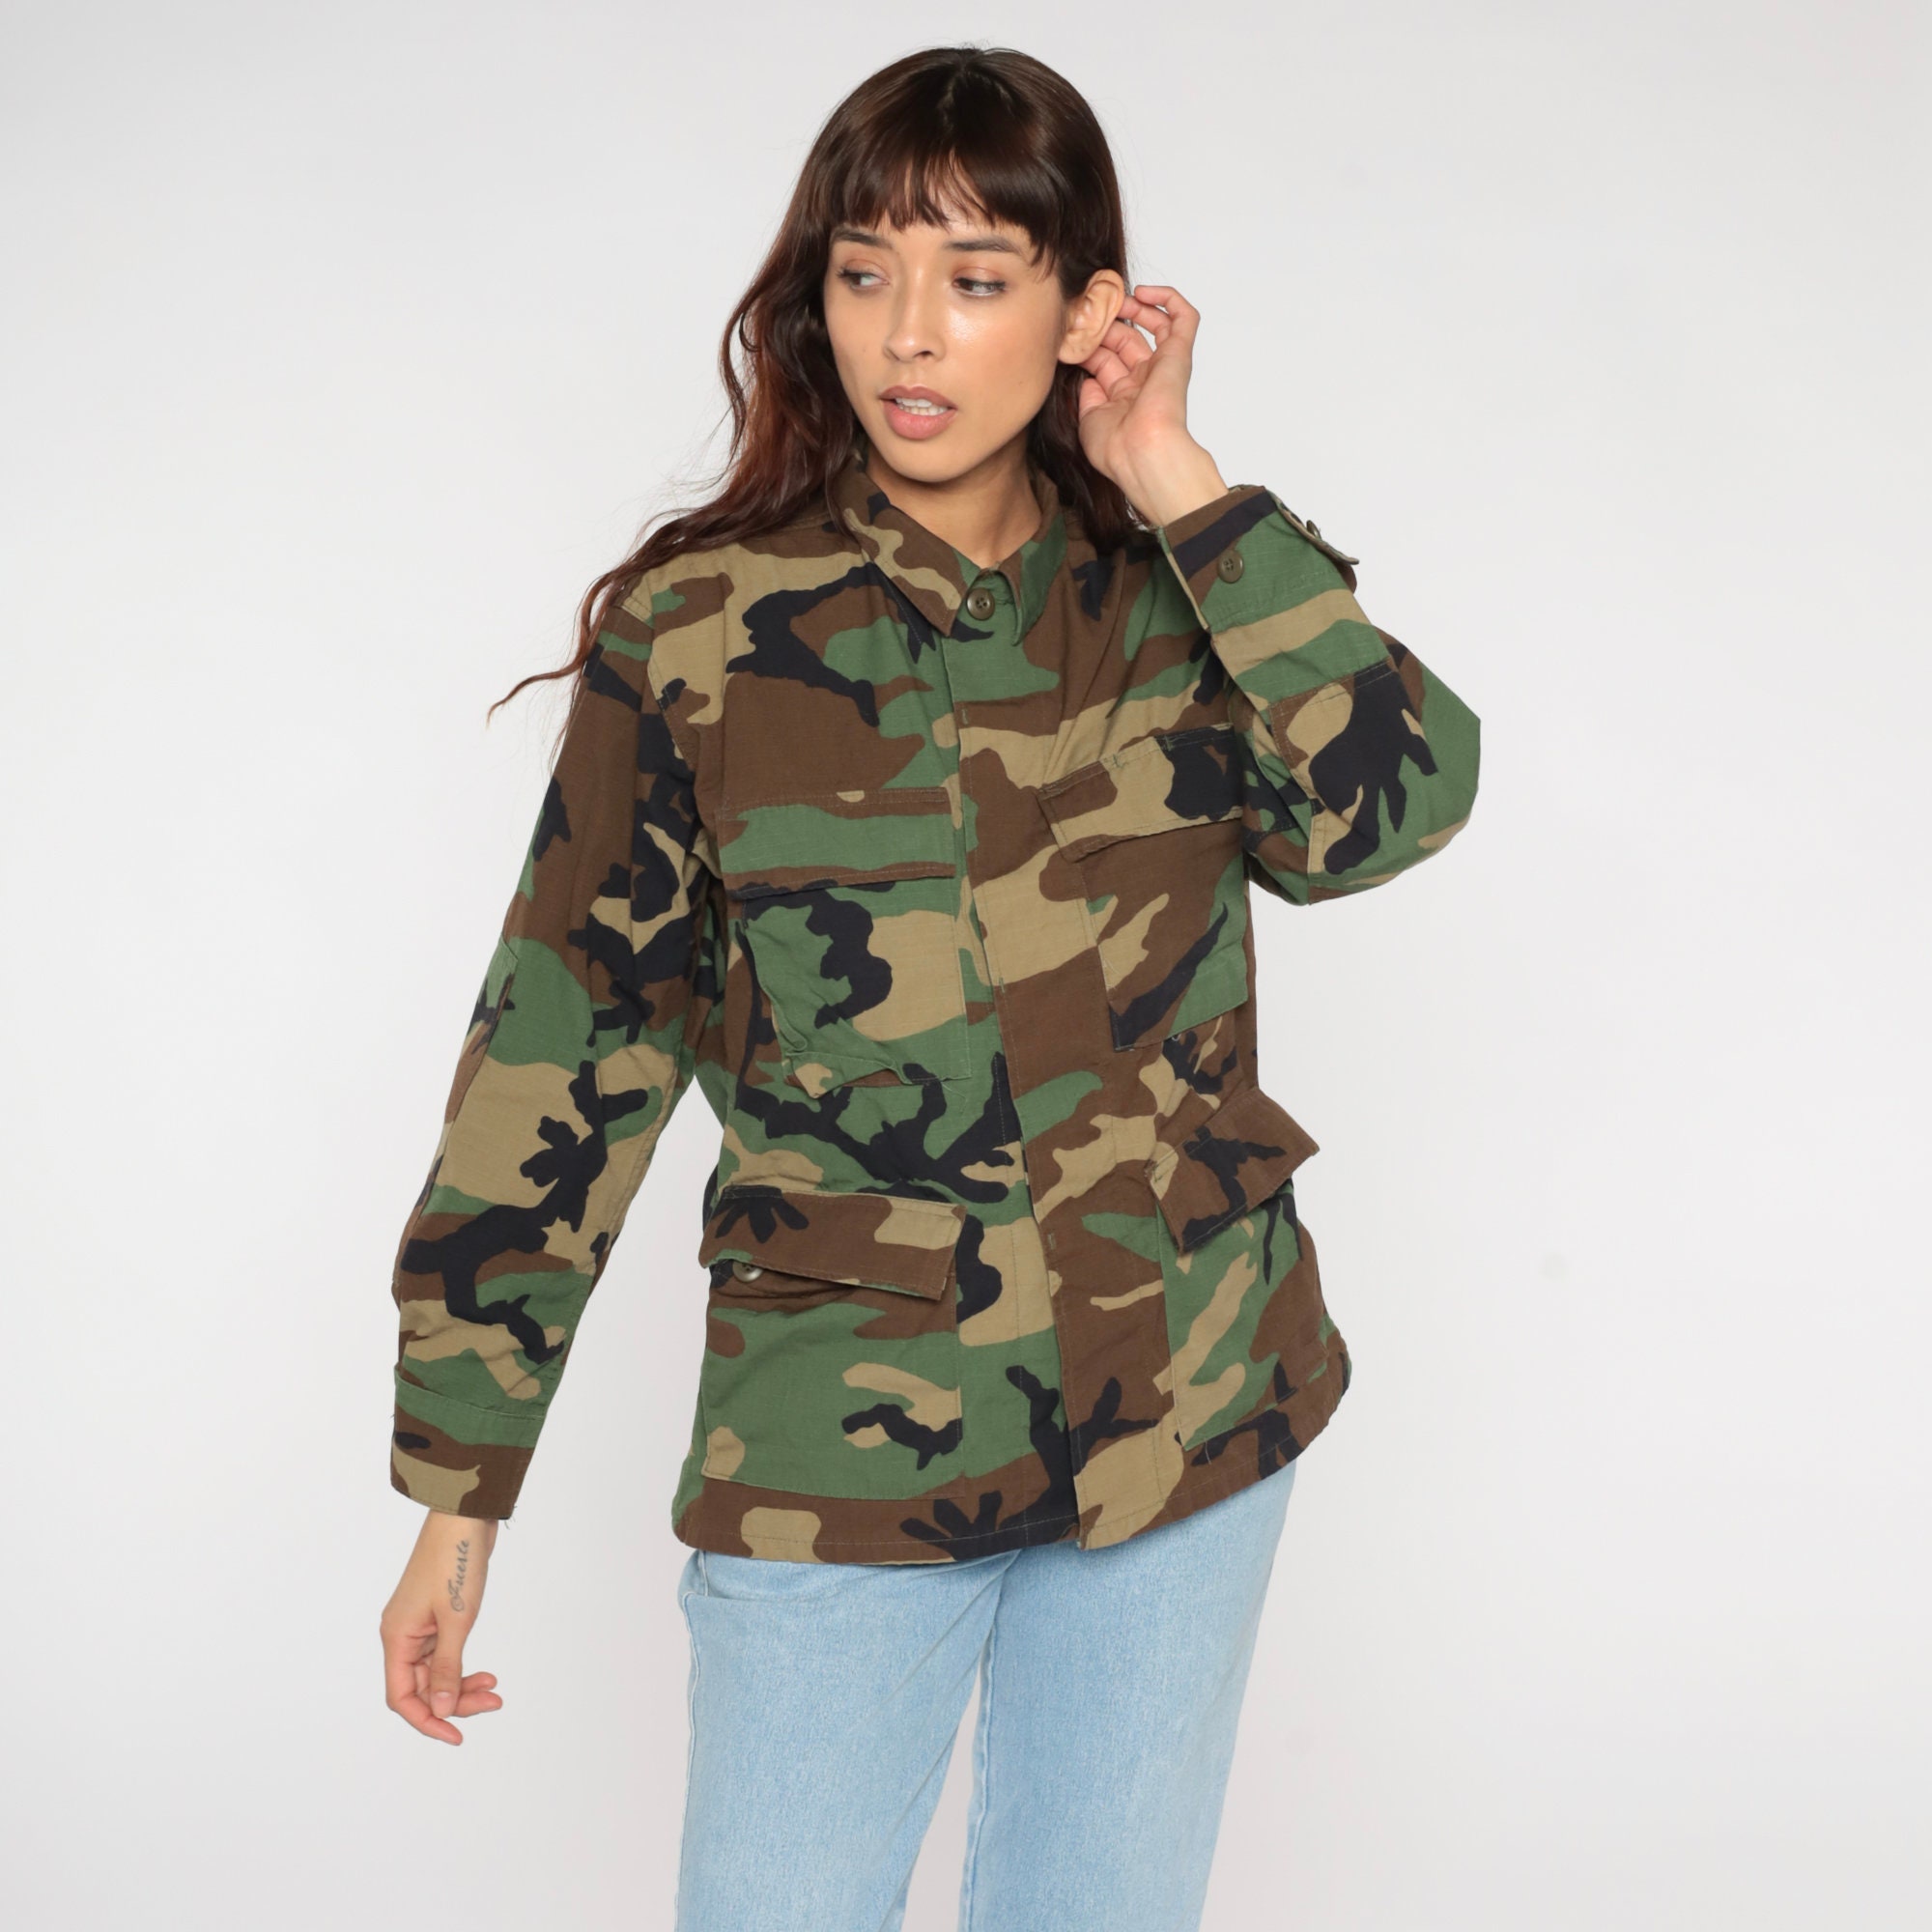 Army Shirt 90s Camo Jacket Green Button Up US Camouflage Military ...